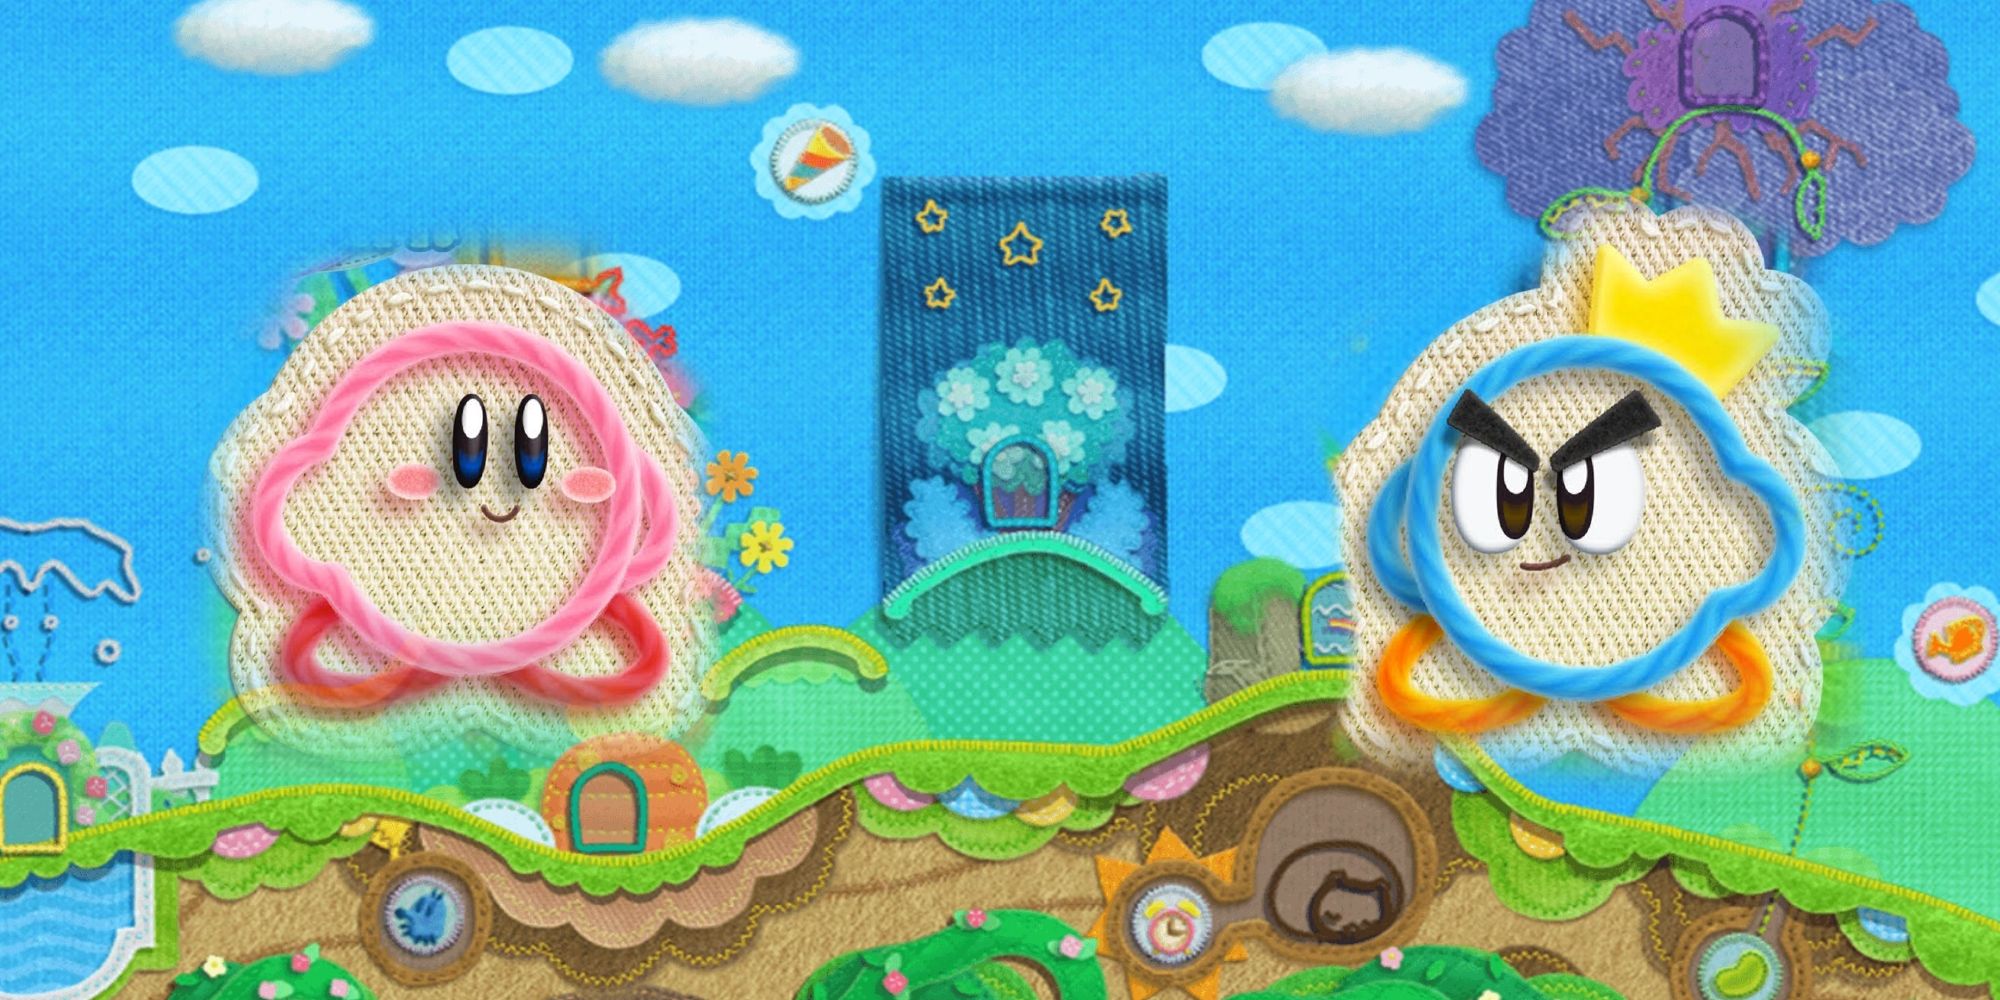 Kirby and prince fluff